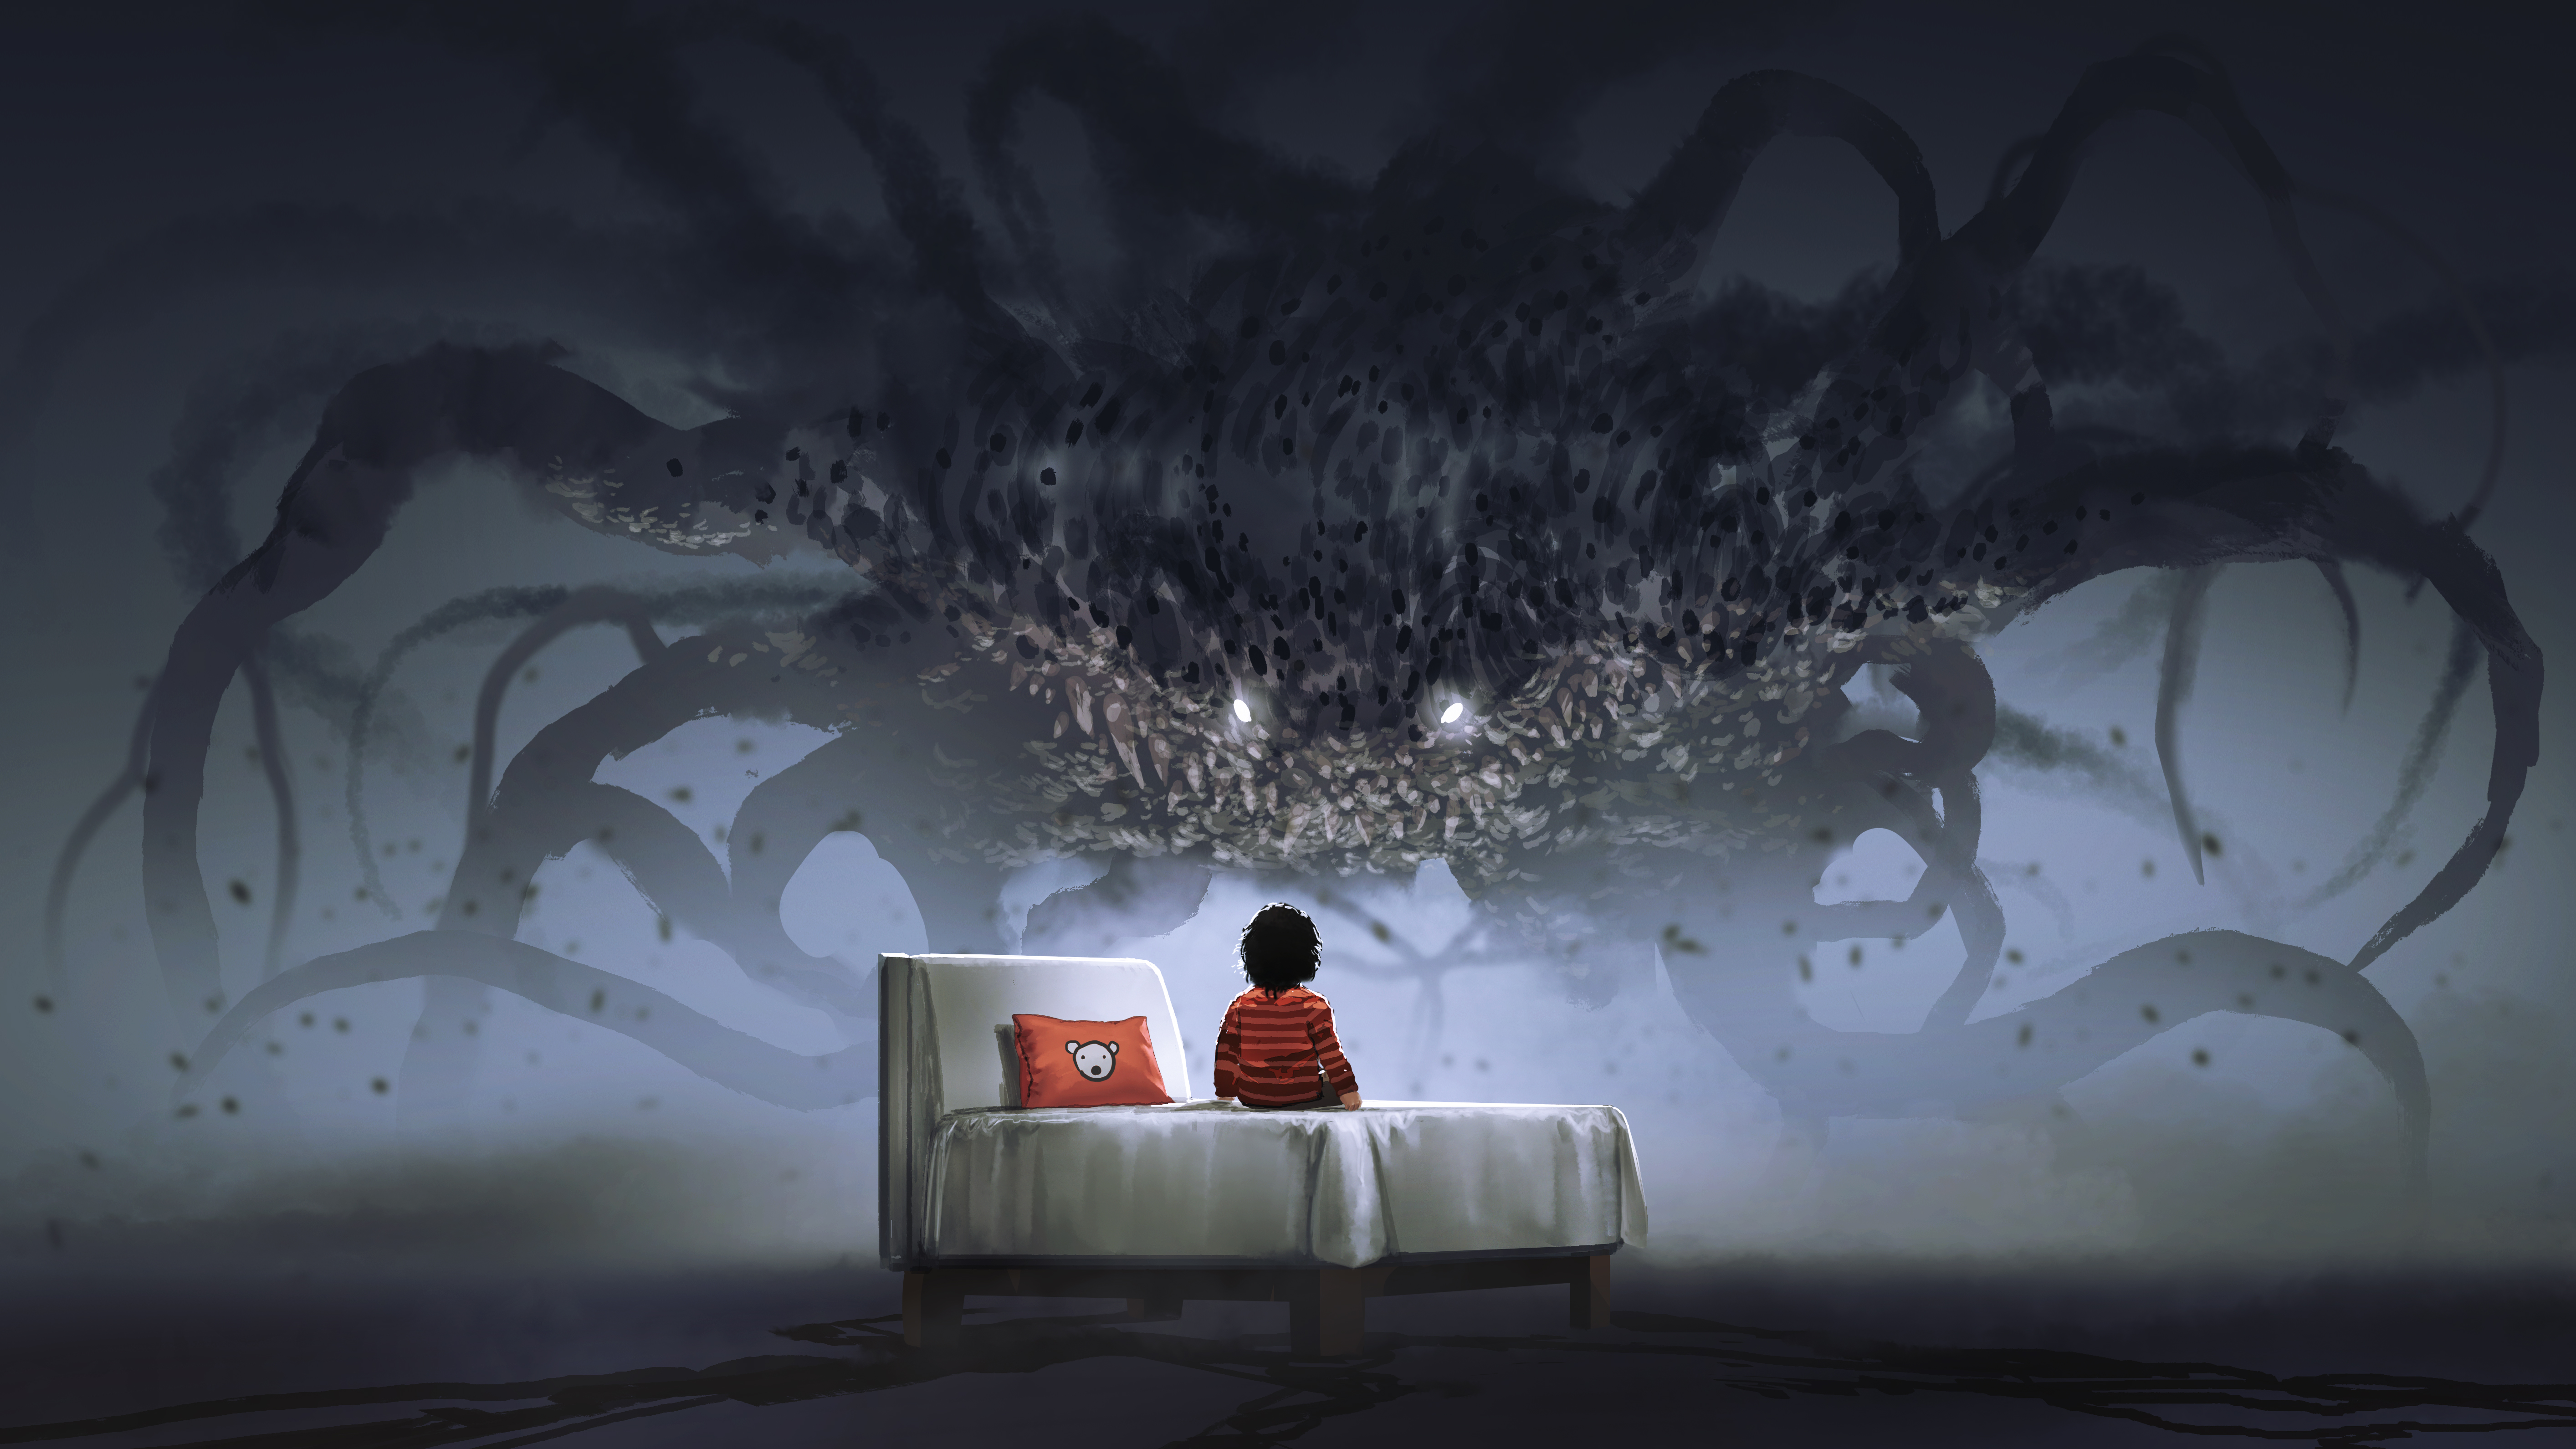 Illustration of a small child sitting on a small bed with a large tentacled monster hovering over.